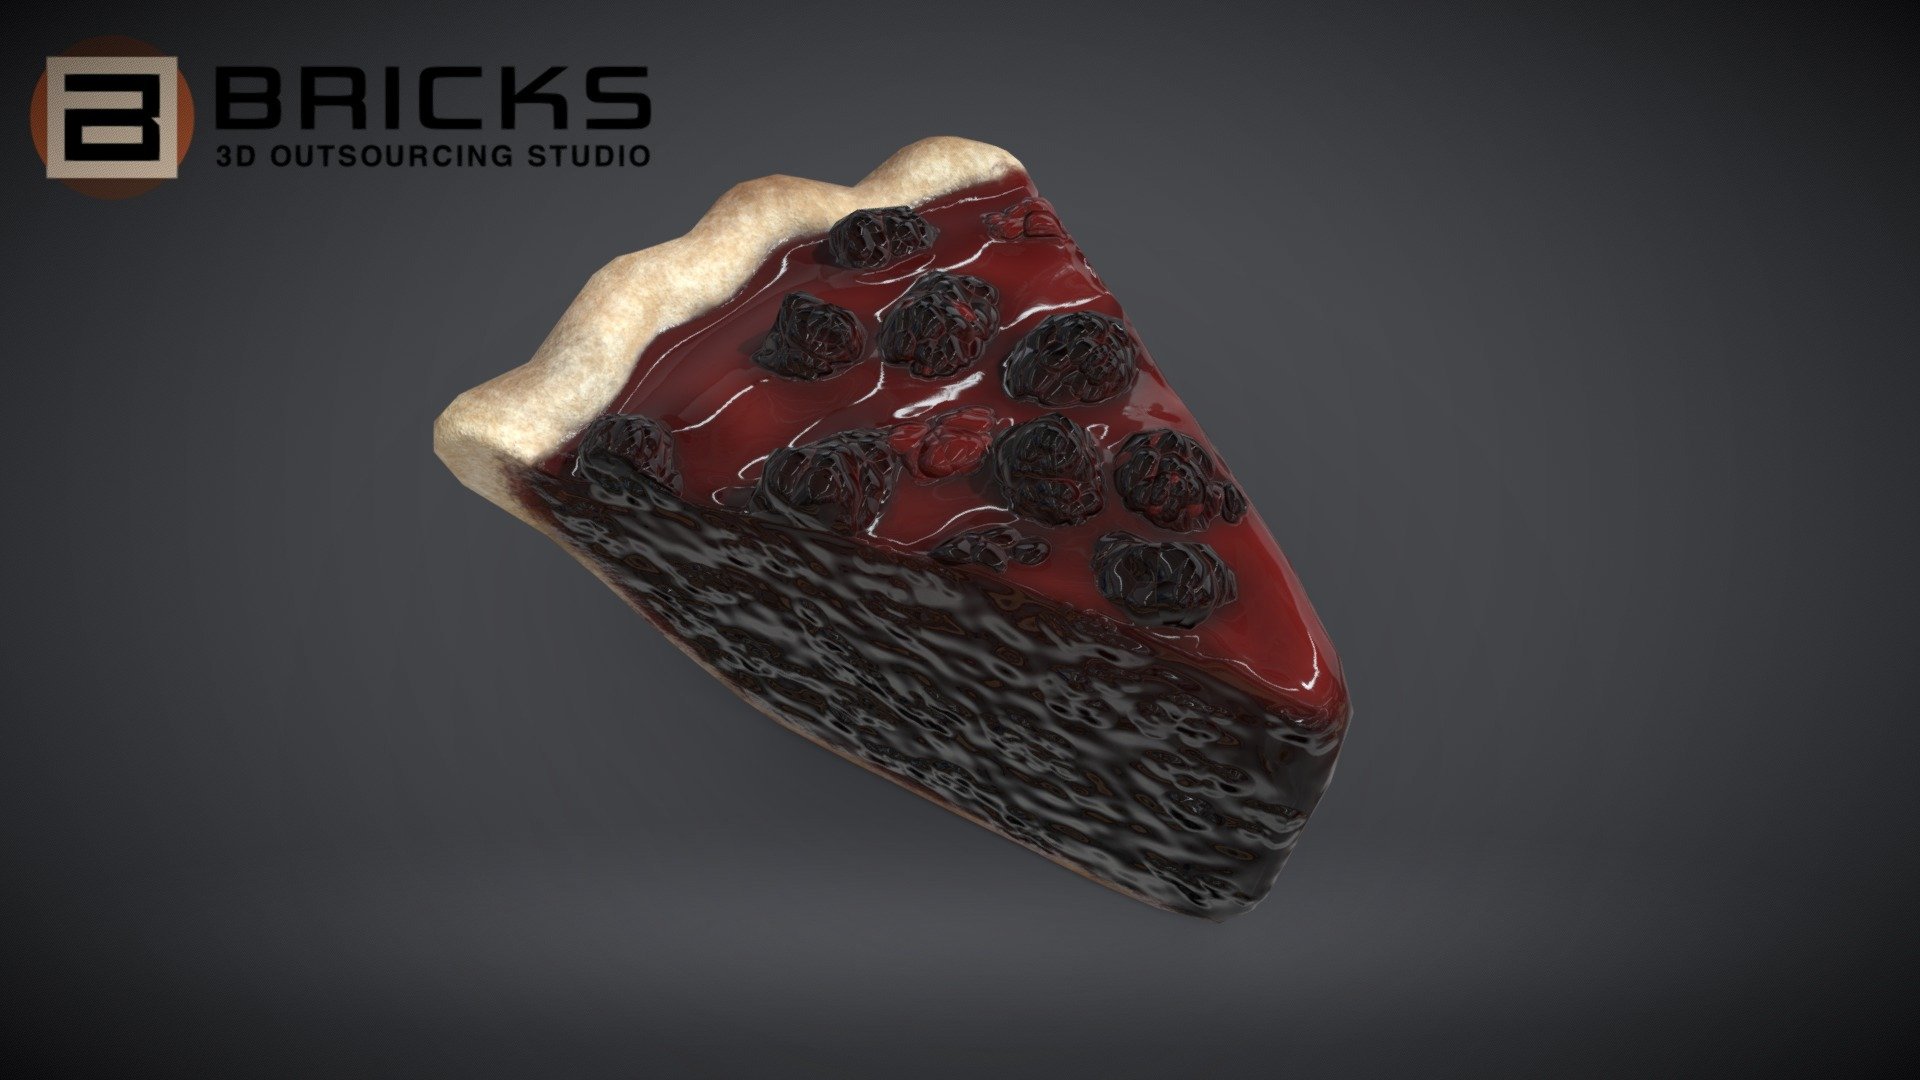 PBR Food Asset:
BlackGrassberryPiePiece
Polycount: 1114
Vertex count: 559
Texture Size: 2048px x 2048px
Normal: OpenGL

If you need any adjust in file please contact us: team@bricks3dstudio.com

Hire us: tringuyen@bricks3dstudio.com
Here is us: https://www.bricks3dstudio.com/
        https://www.artstation.com/bricksstudio
        https://www.facebook.com/Bricks3dstudio/
        https://www.linkedin.com/in/bricks-studio-b10462252/ - BlackGrassberryPiePiece - Buy Royalty Free 3D model by Bricks Studio (@bricks3dstudio) 3d model